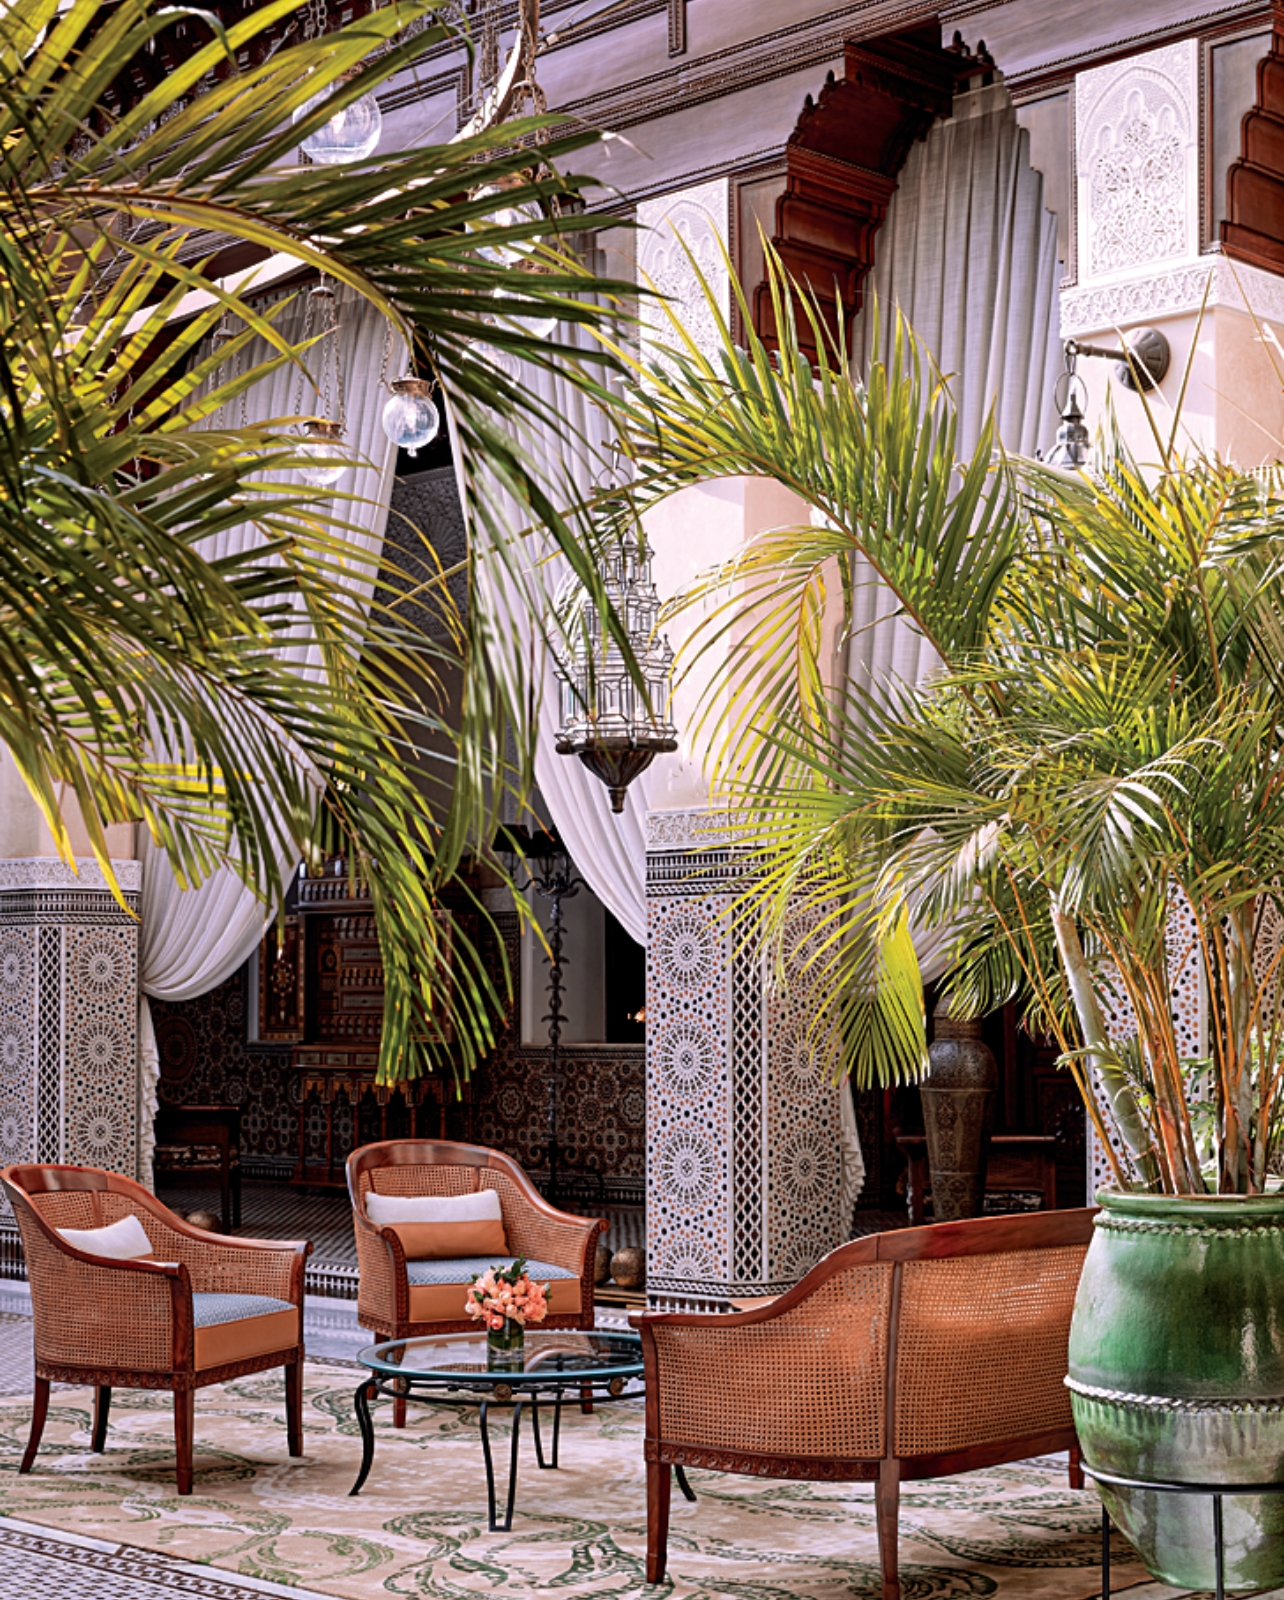 Interior of the lobby at Royal Mansour, Marrakech